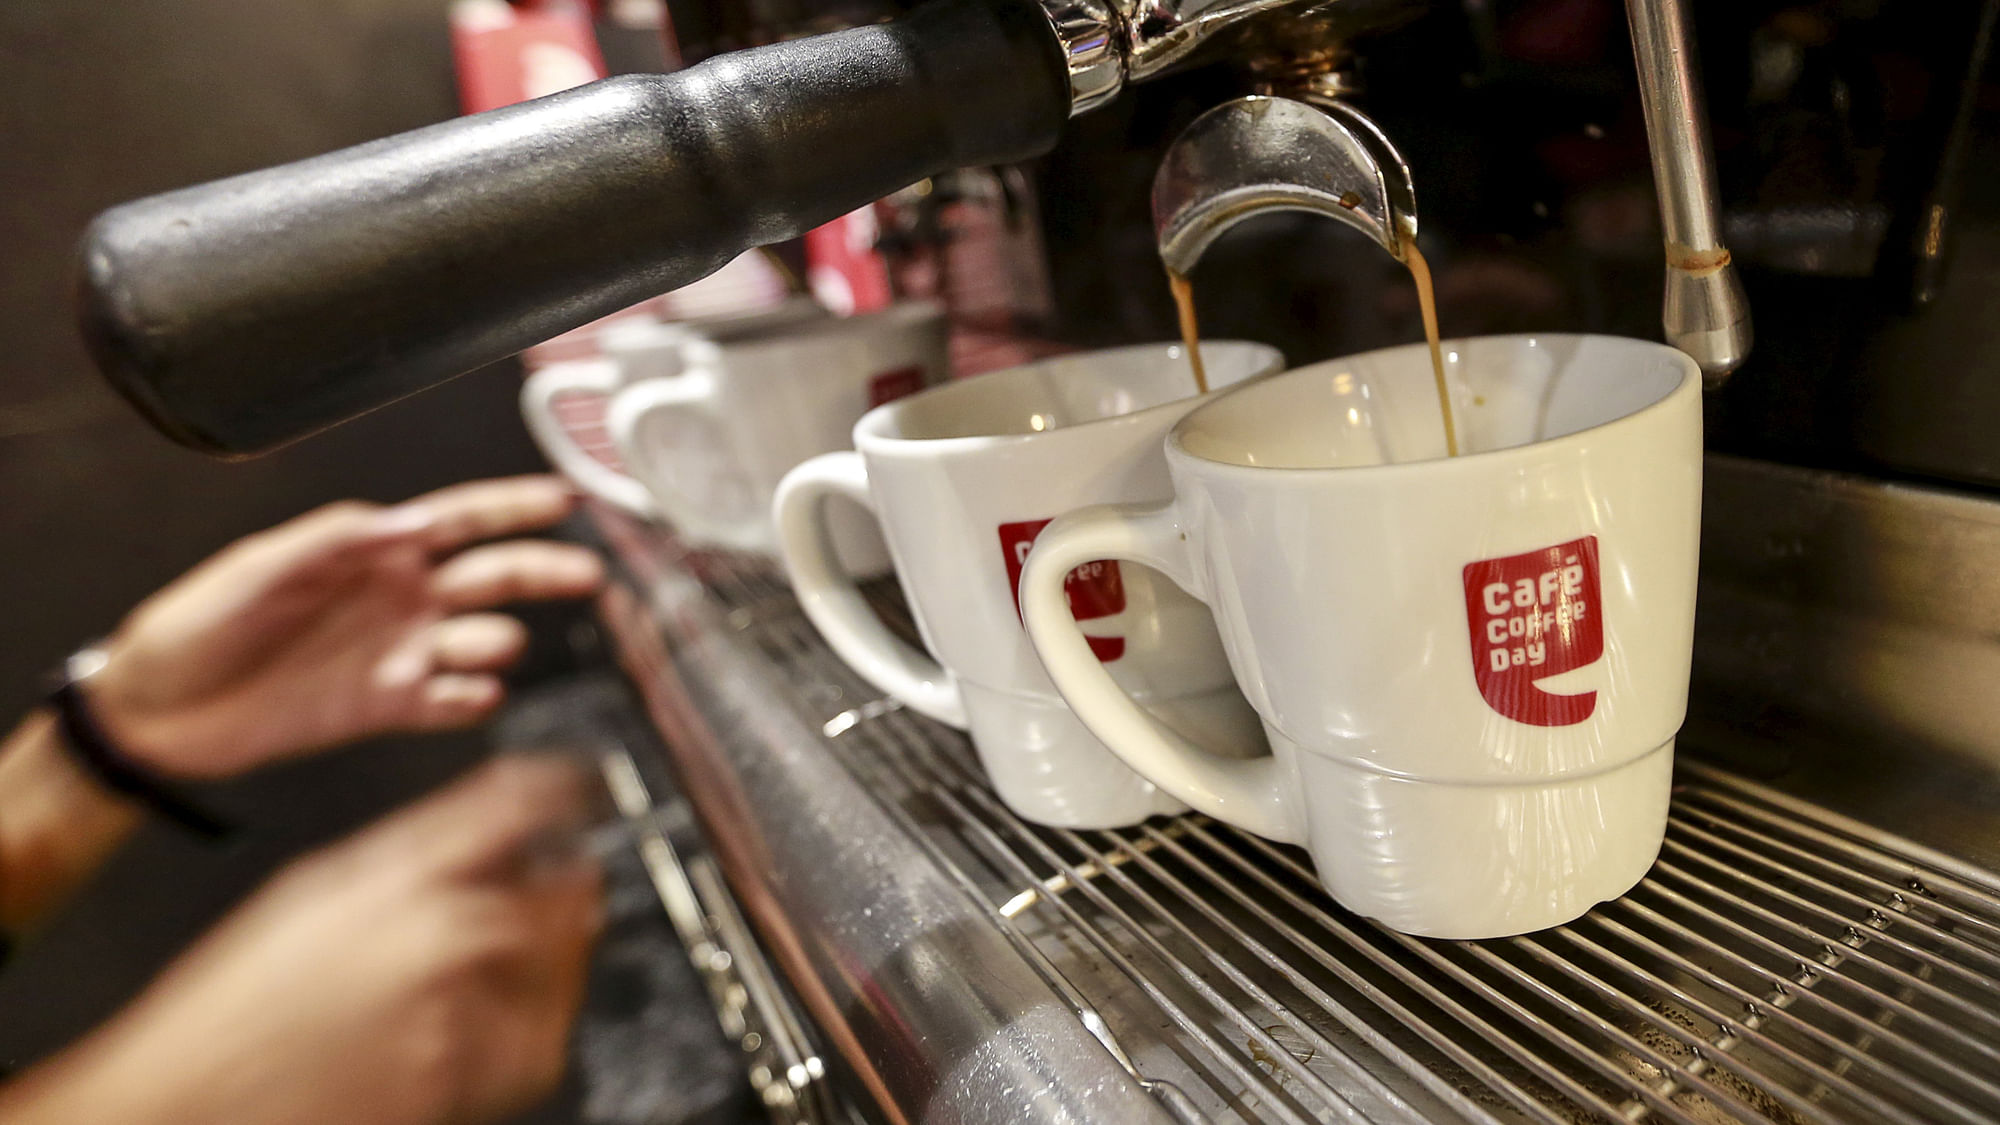 Coffee being prepared at a Cafe Coffee Day outlet in Mumbai.&nbsp;